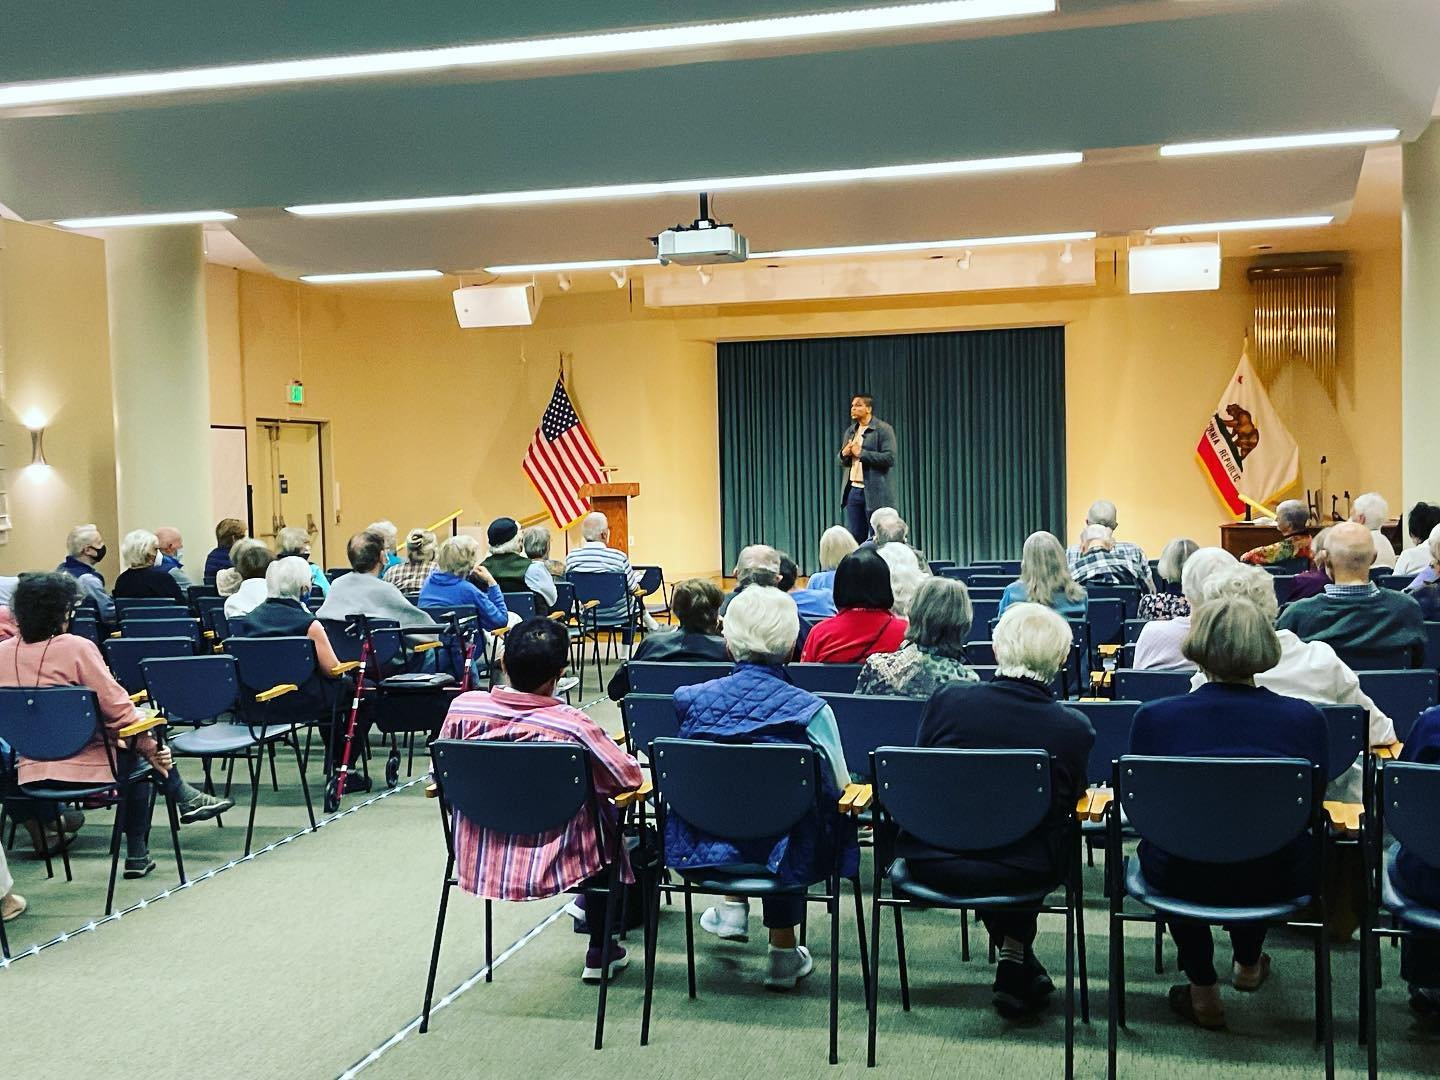 If you need a lesson on civic duties and citizenship, look no farther than the historic and awesome Channing House in Palo Alto. We had a huge crowd of our elders, all believing that our campaign gives them hope for their grandchildren -- especially 